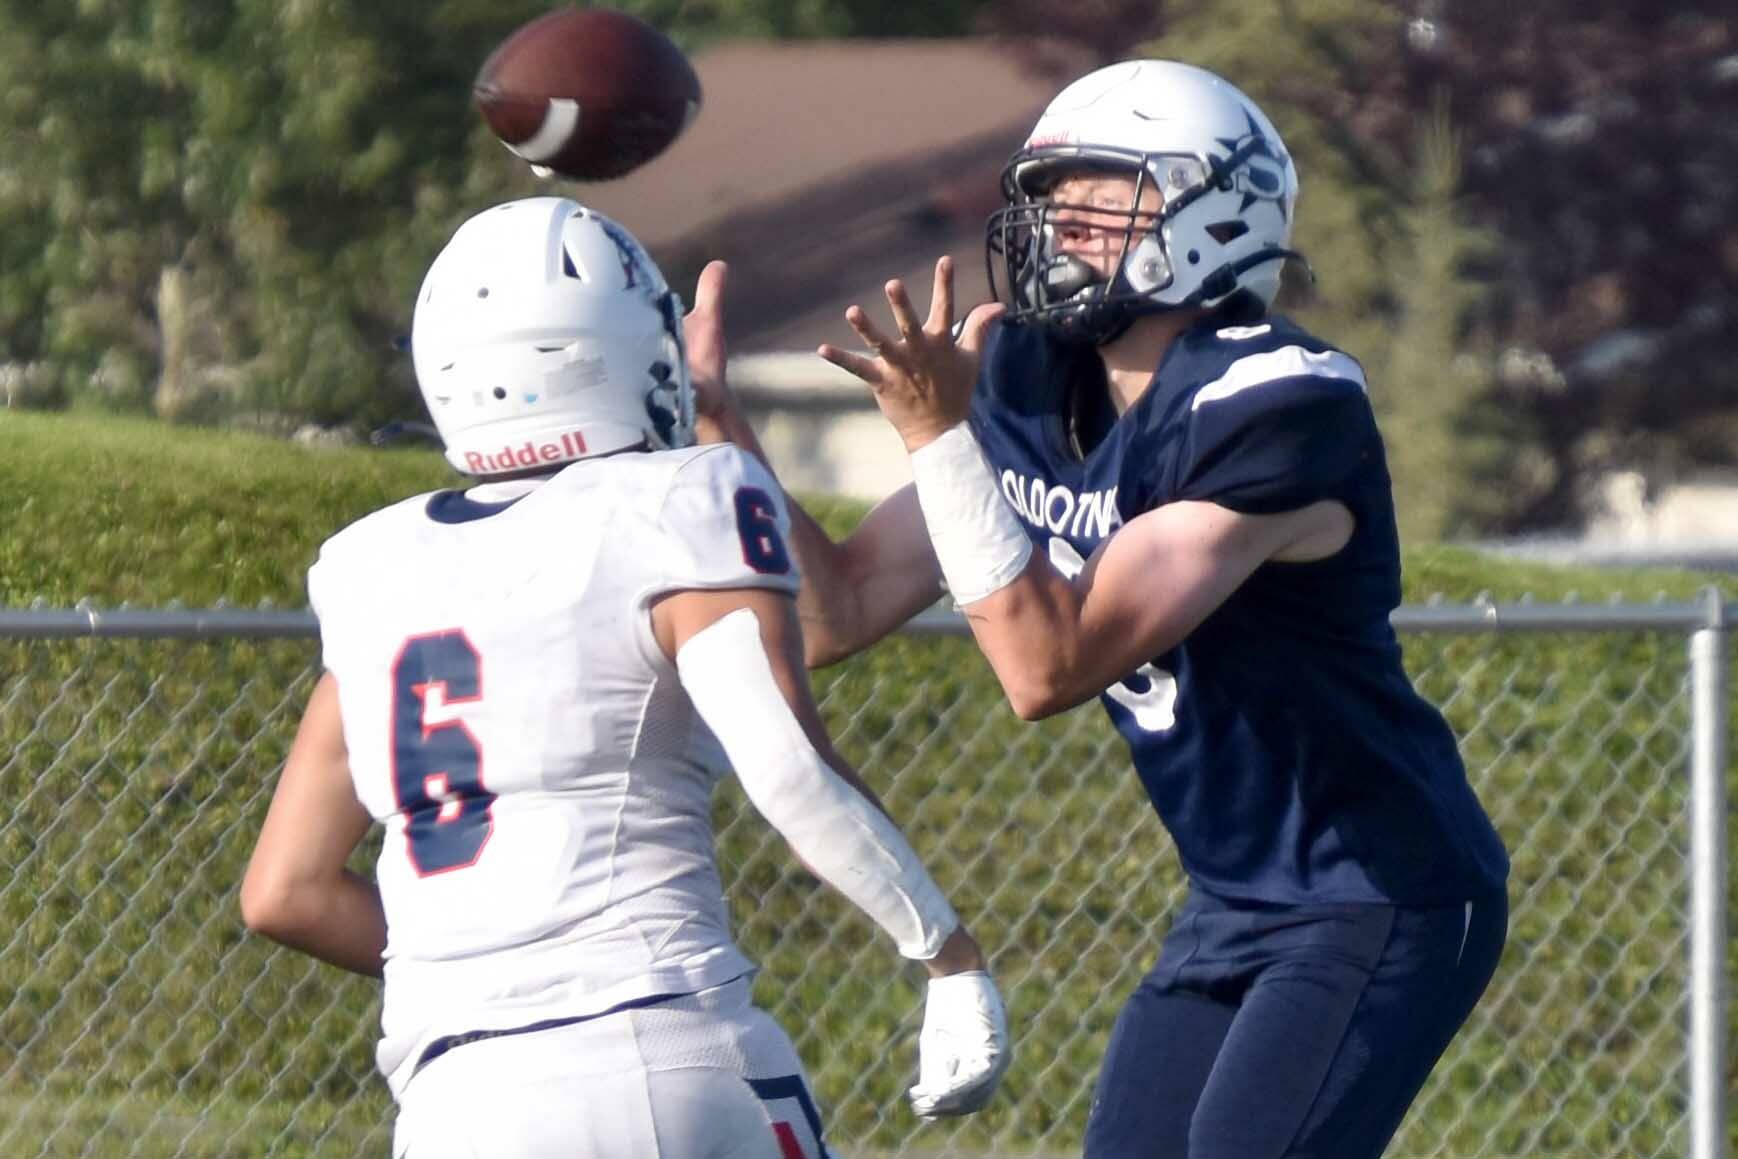 Soldotna's Andrew Pieh catches a pass in front of North Pole's Korbin Wallace on Friday, Aug. 18, 2023, at Justin Maile Field at Soldotna High School in Soldotna, Alaska. (Photo by Jeff Helminiak/Peninsula Clarion)